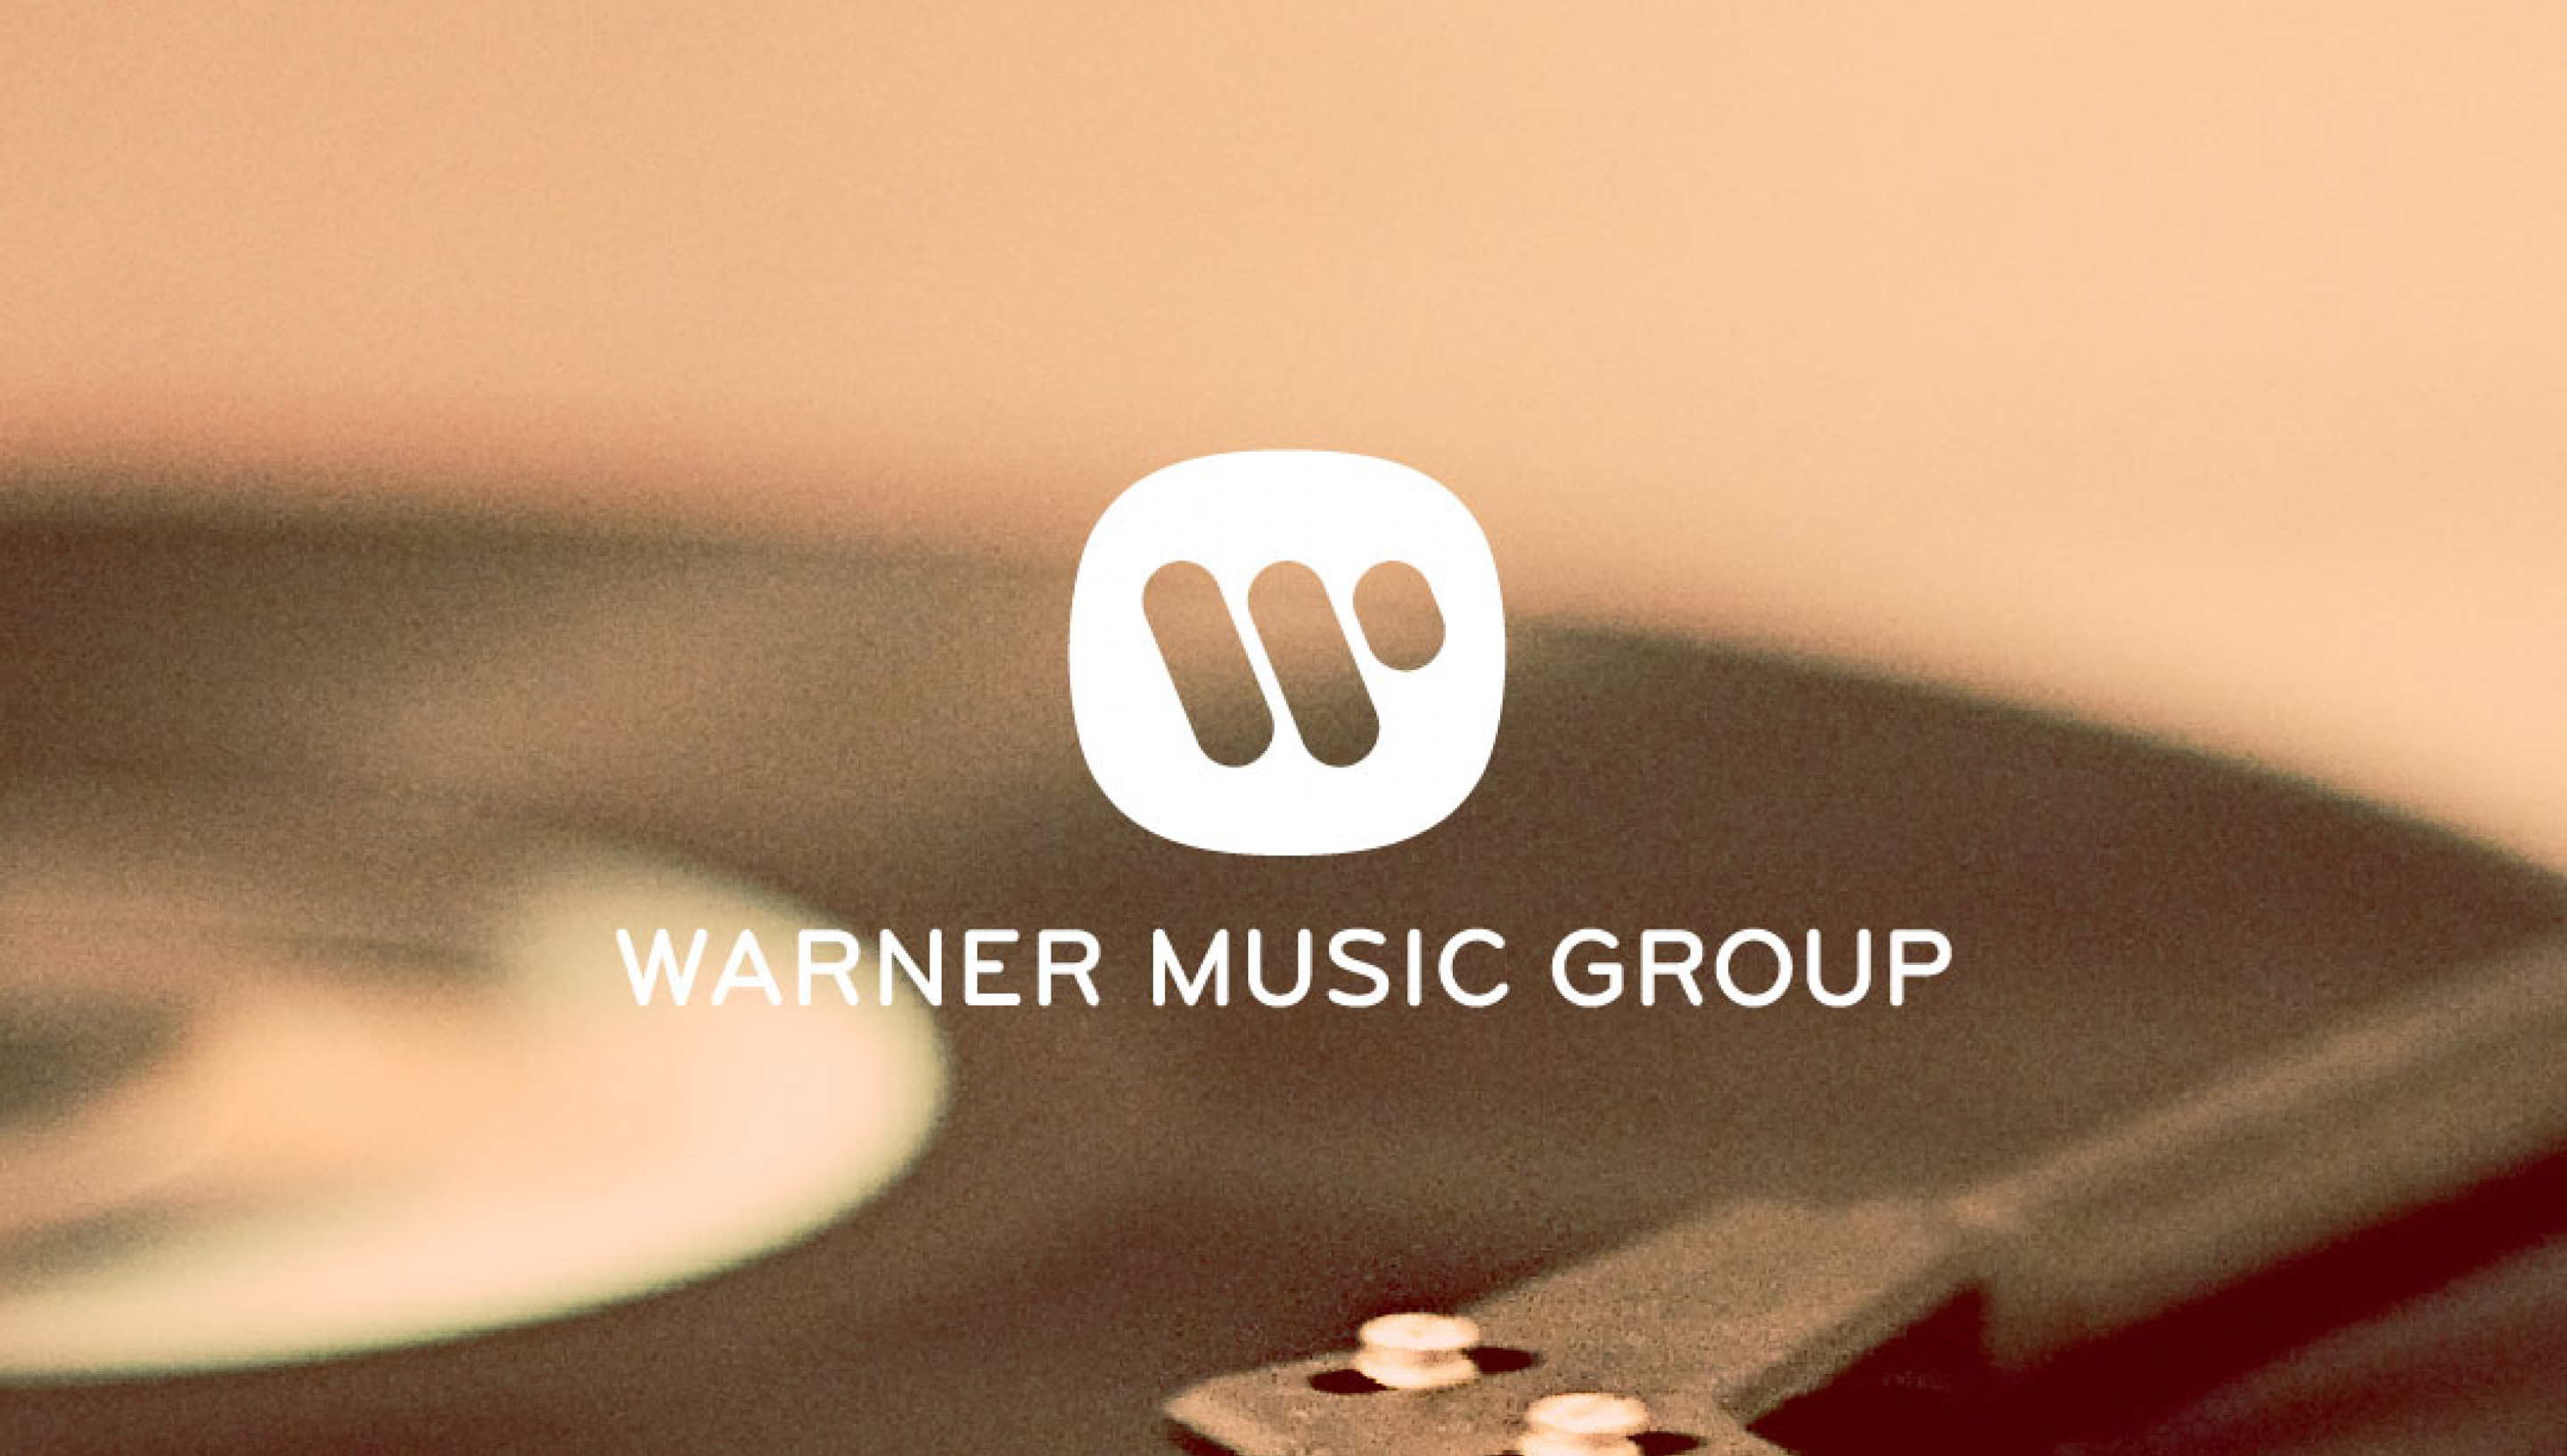 Warner Music Group starts year with 16.7% revenue growth; investing in A&R and digital innovation